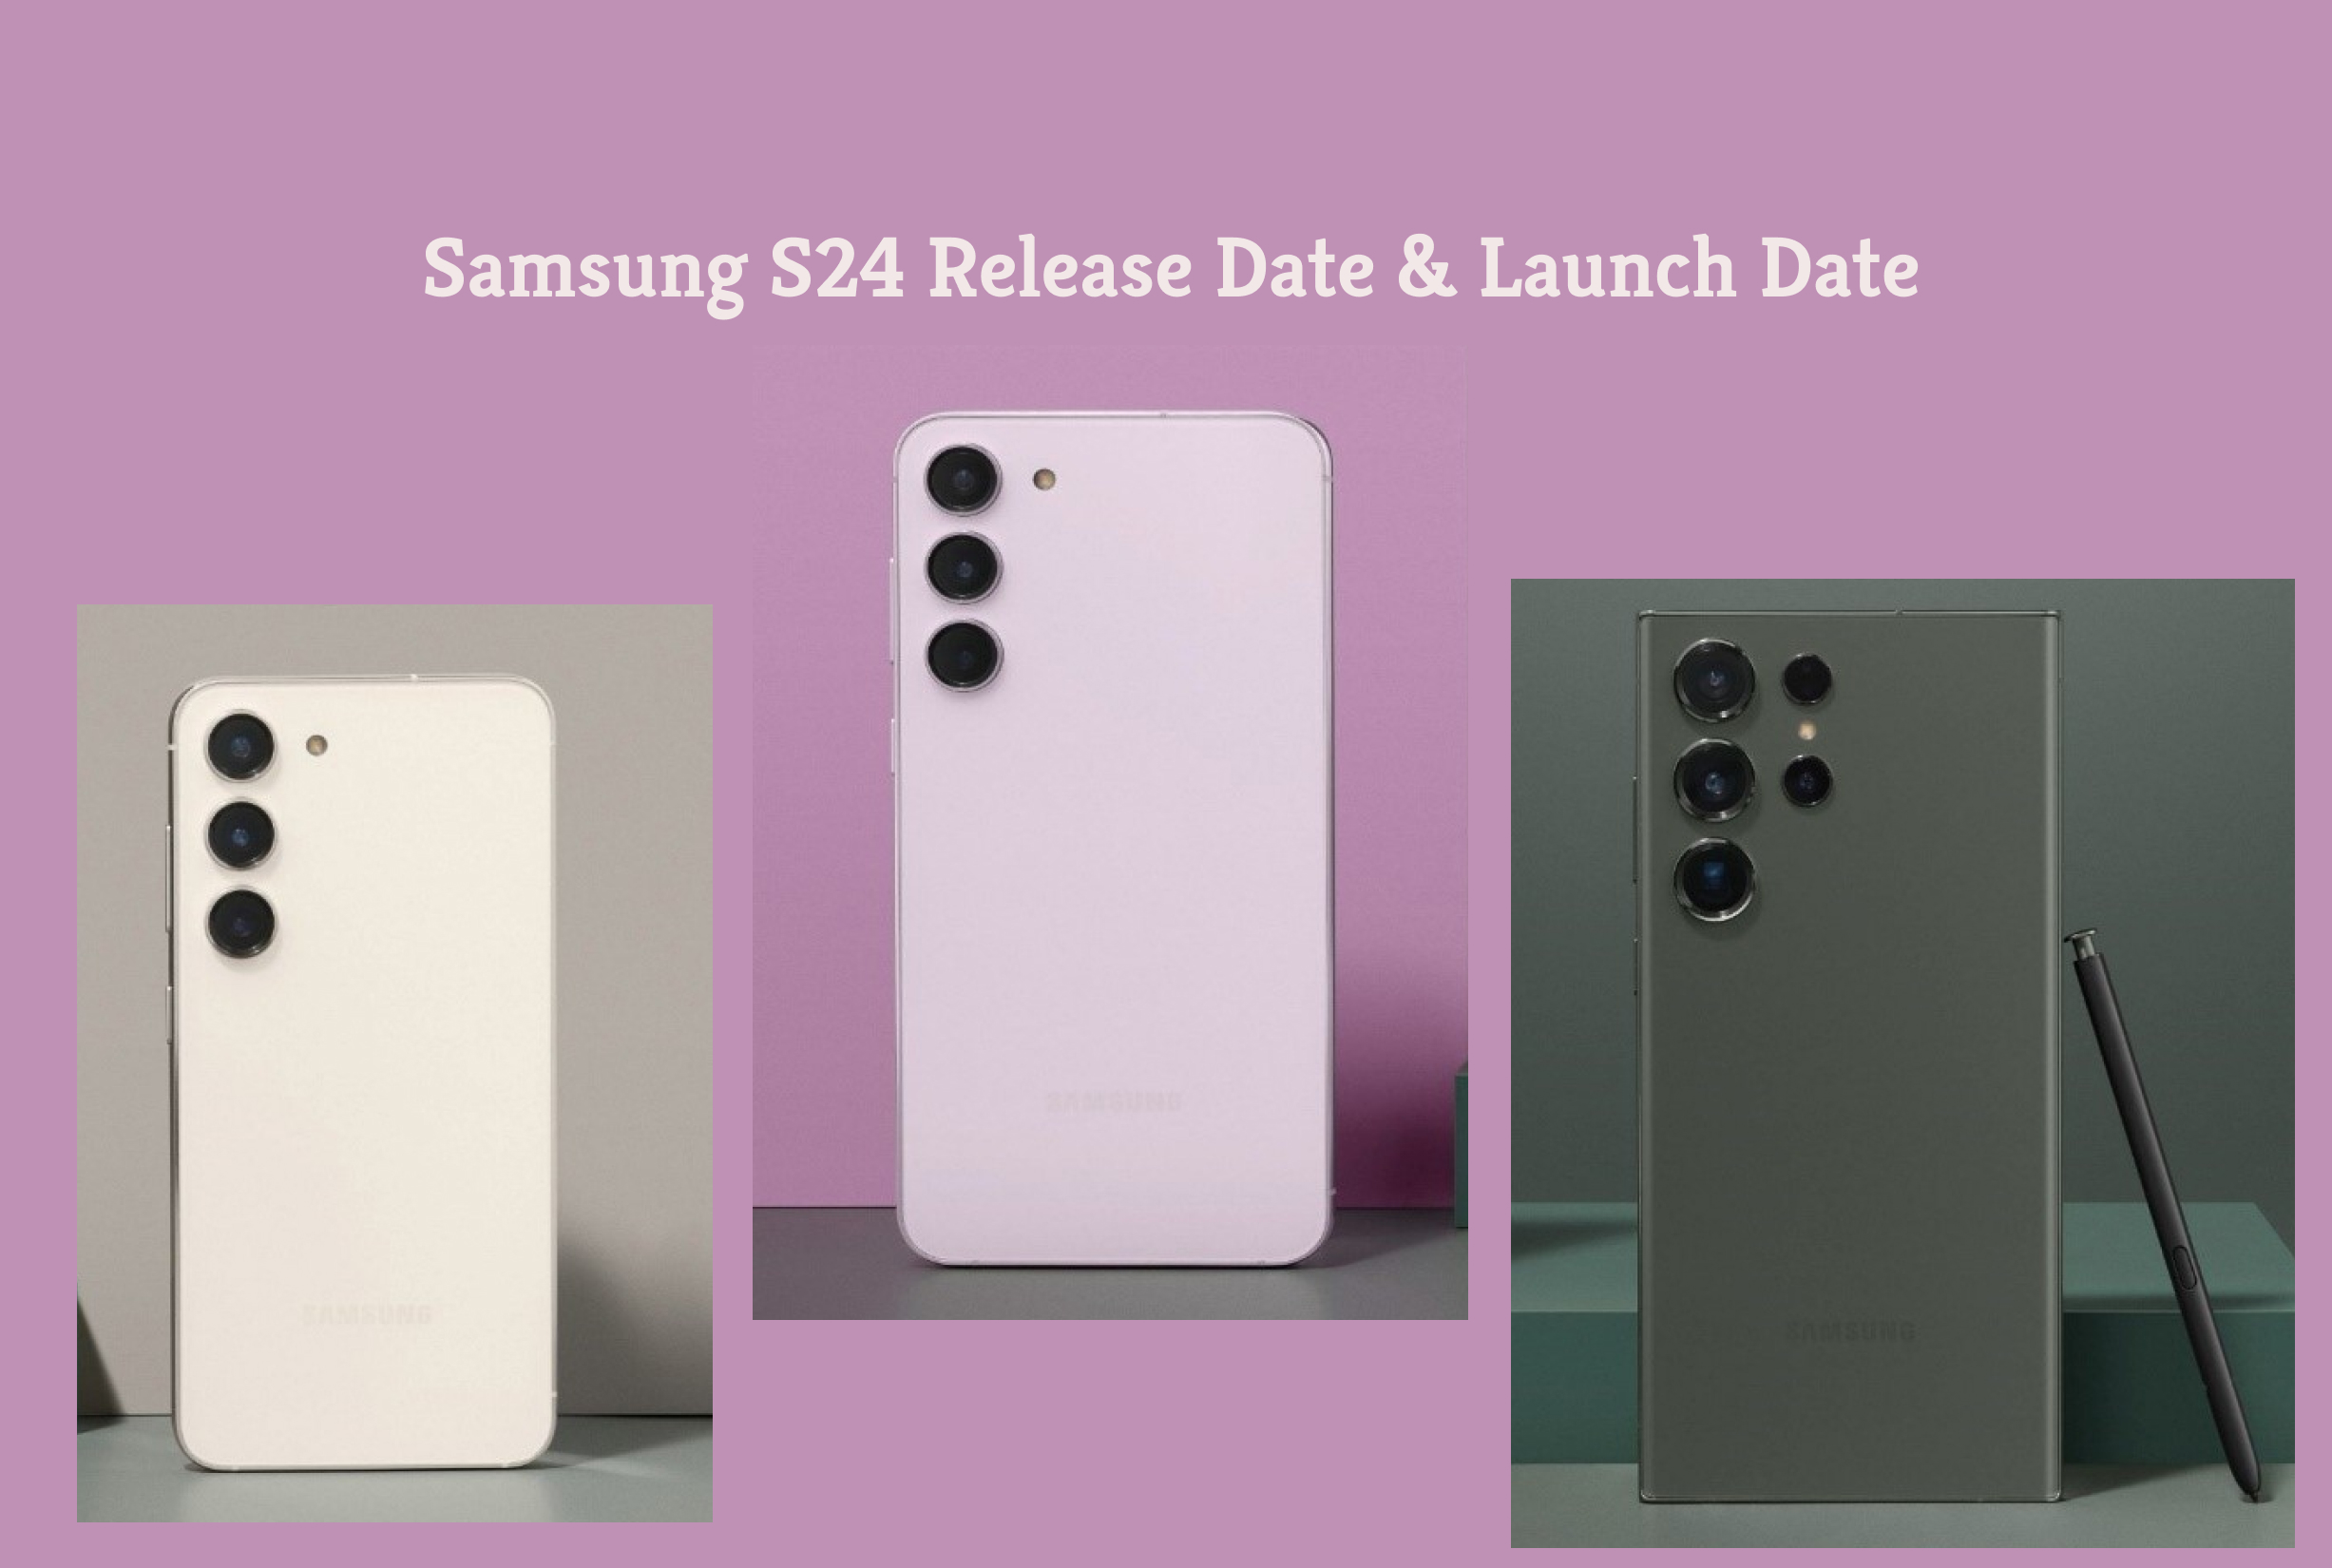 Samsung S24 Release Date: What Do Rumors Say?